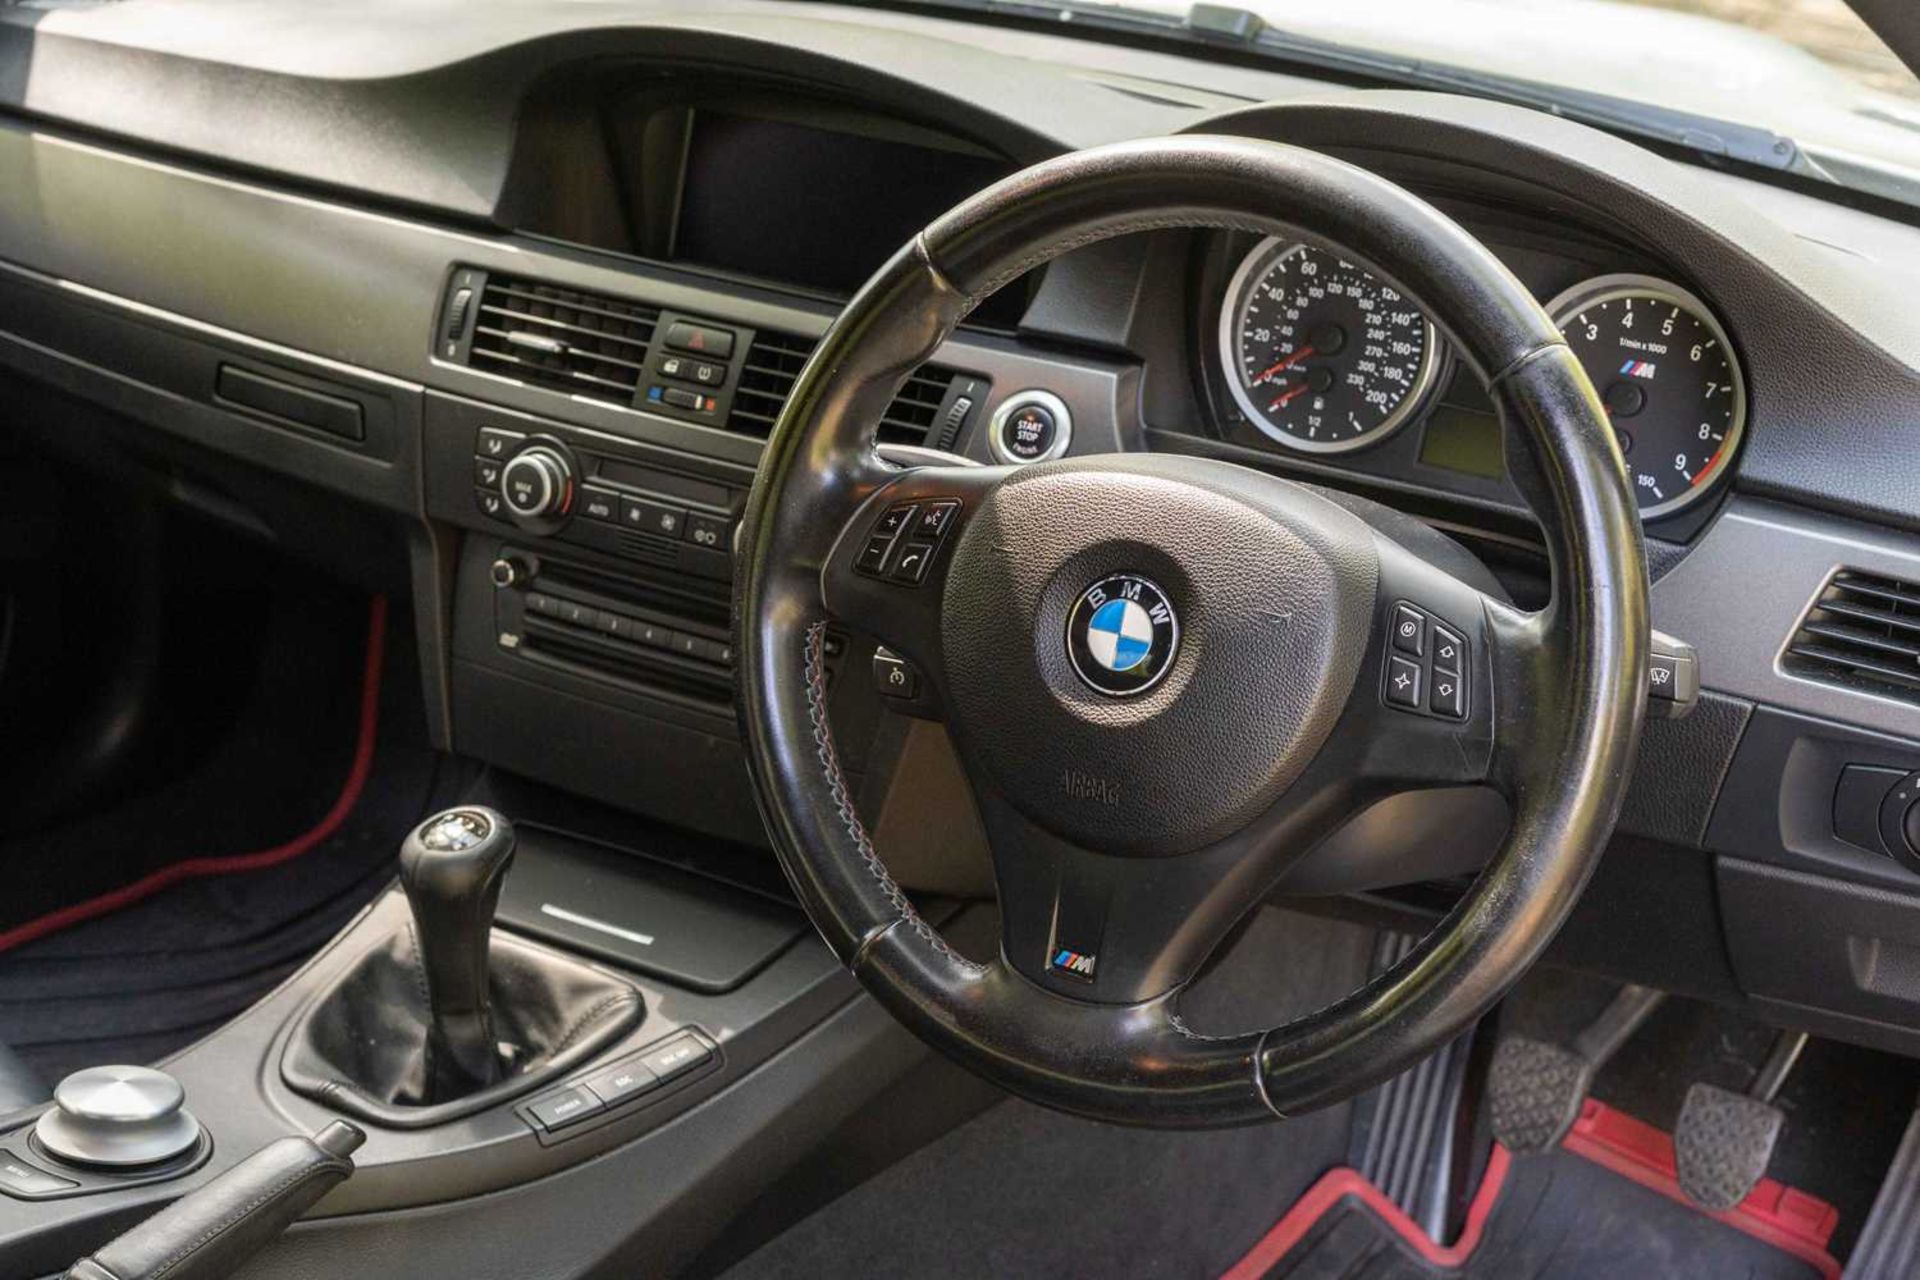 2009 BMW E92 M3  Sought after manual gearbox - Image 47 of 65